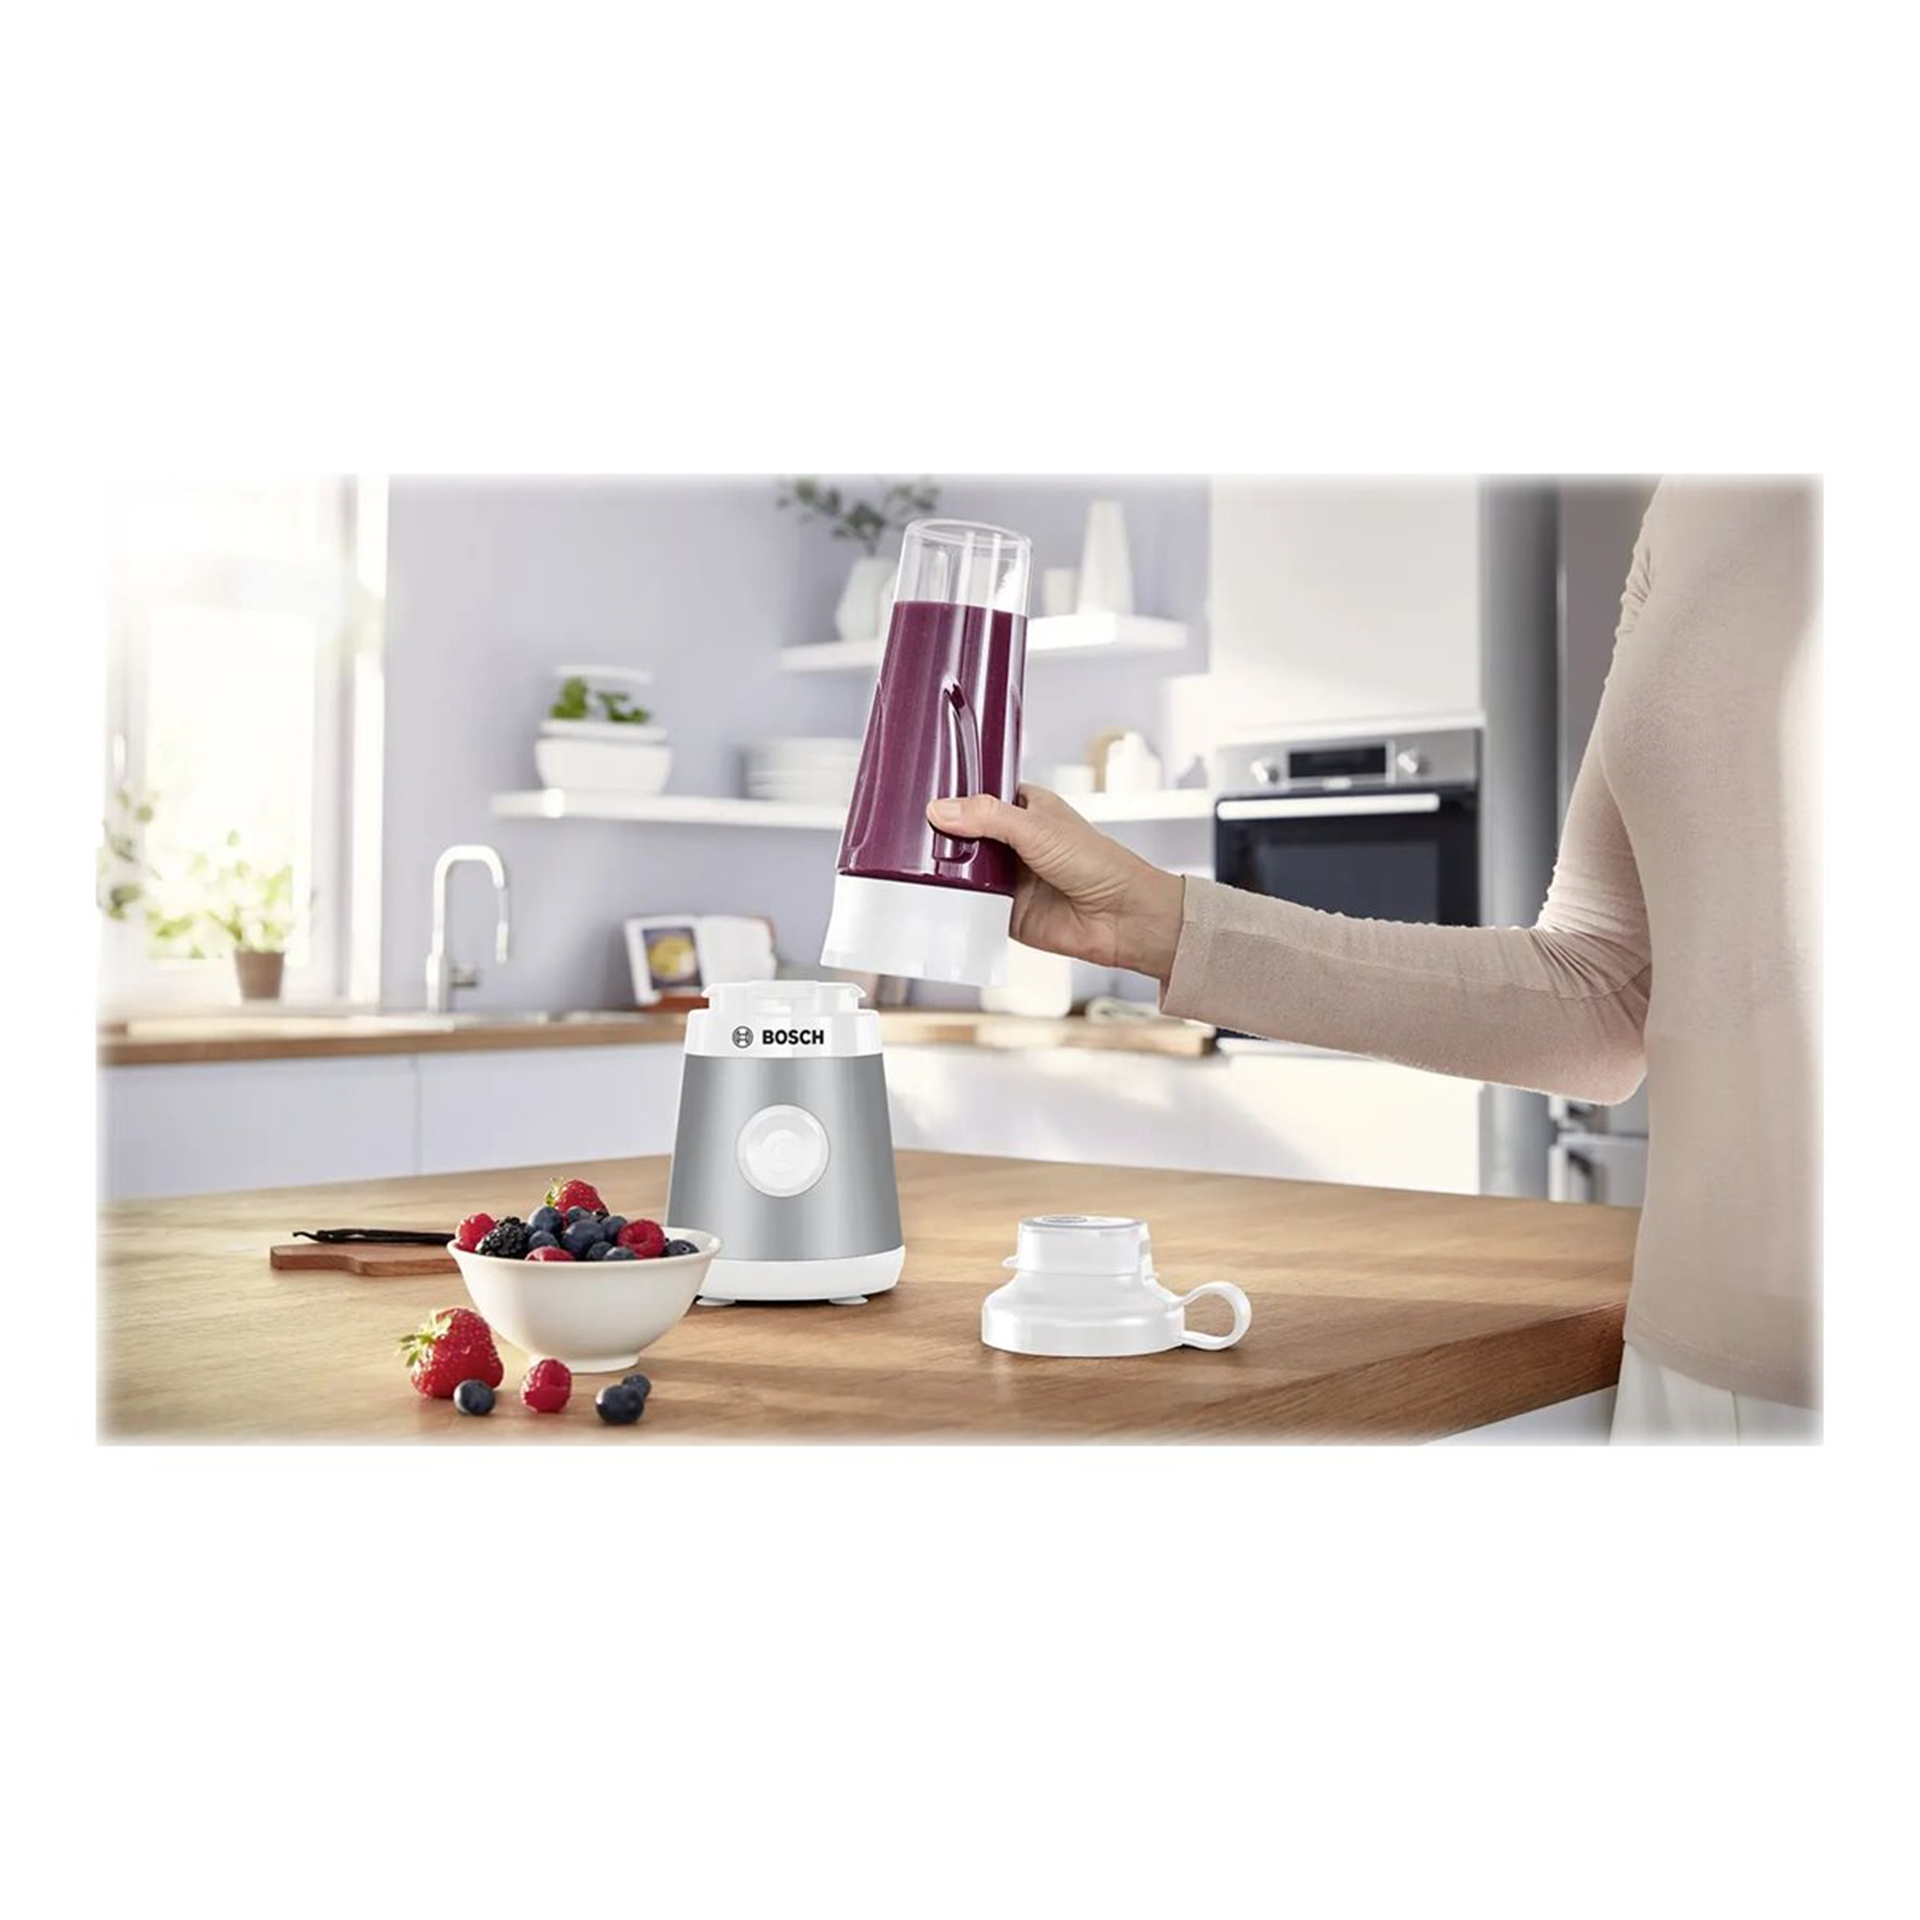 Bosch VitaPower ToGo Smoothie Maker MMB2111T	 Tabletop, 450 W, Jar material Tritan, Jar capacity 0.6 L, Ice crushing, Silver